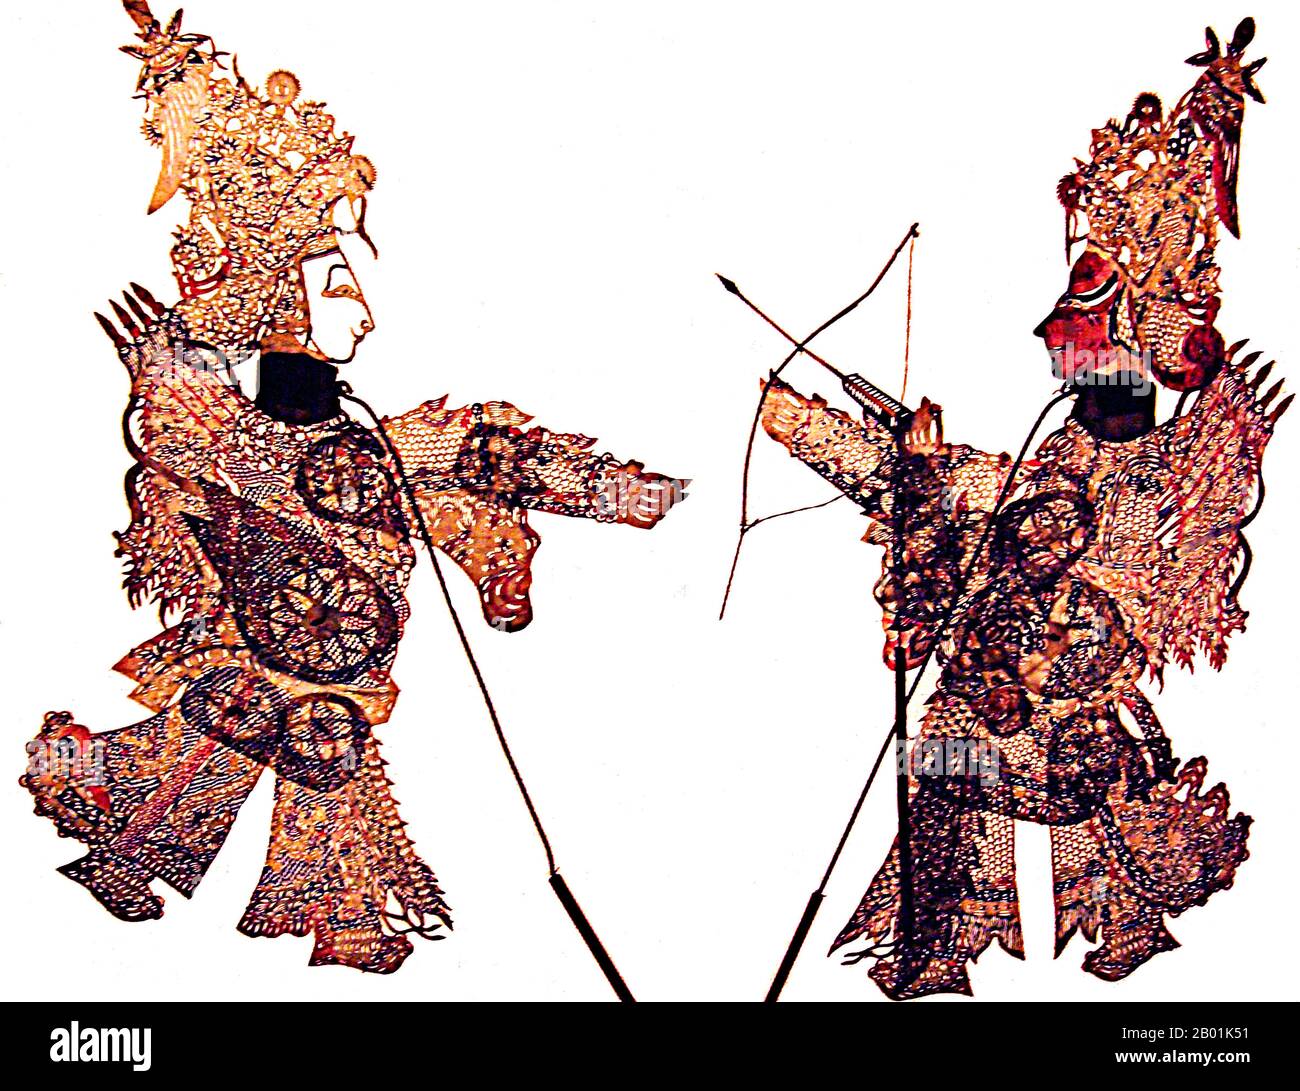 China: Chinese Shadow Play Figures - two warriors; Qianlong Set, c. 1780.  Shadow play (Chinese: 皮影戏, pí yĭng xì) or shadow puppetry is an ancient form of storytelling and entertainment using opaque, often articulated figures in front of an illuminated backdrop to create the illusion of moving images. It is popular in various cultures. At present, more than 20 countries are known to have shadow show troupes.  Shadow puppetry originated during the Han Dynasty when one of the concubines of Emperor Wu of Han died from an illness. Stock Photo